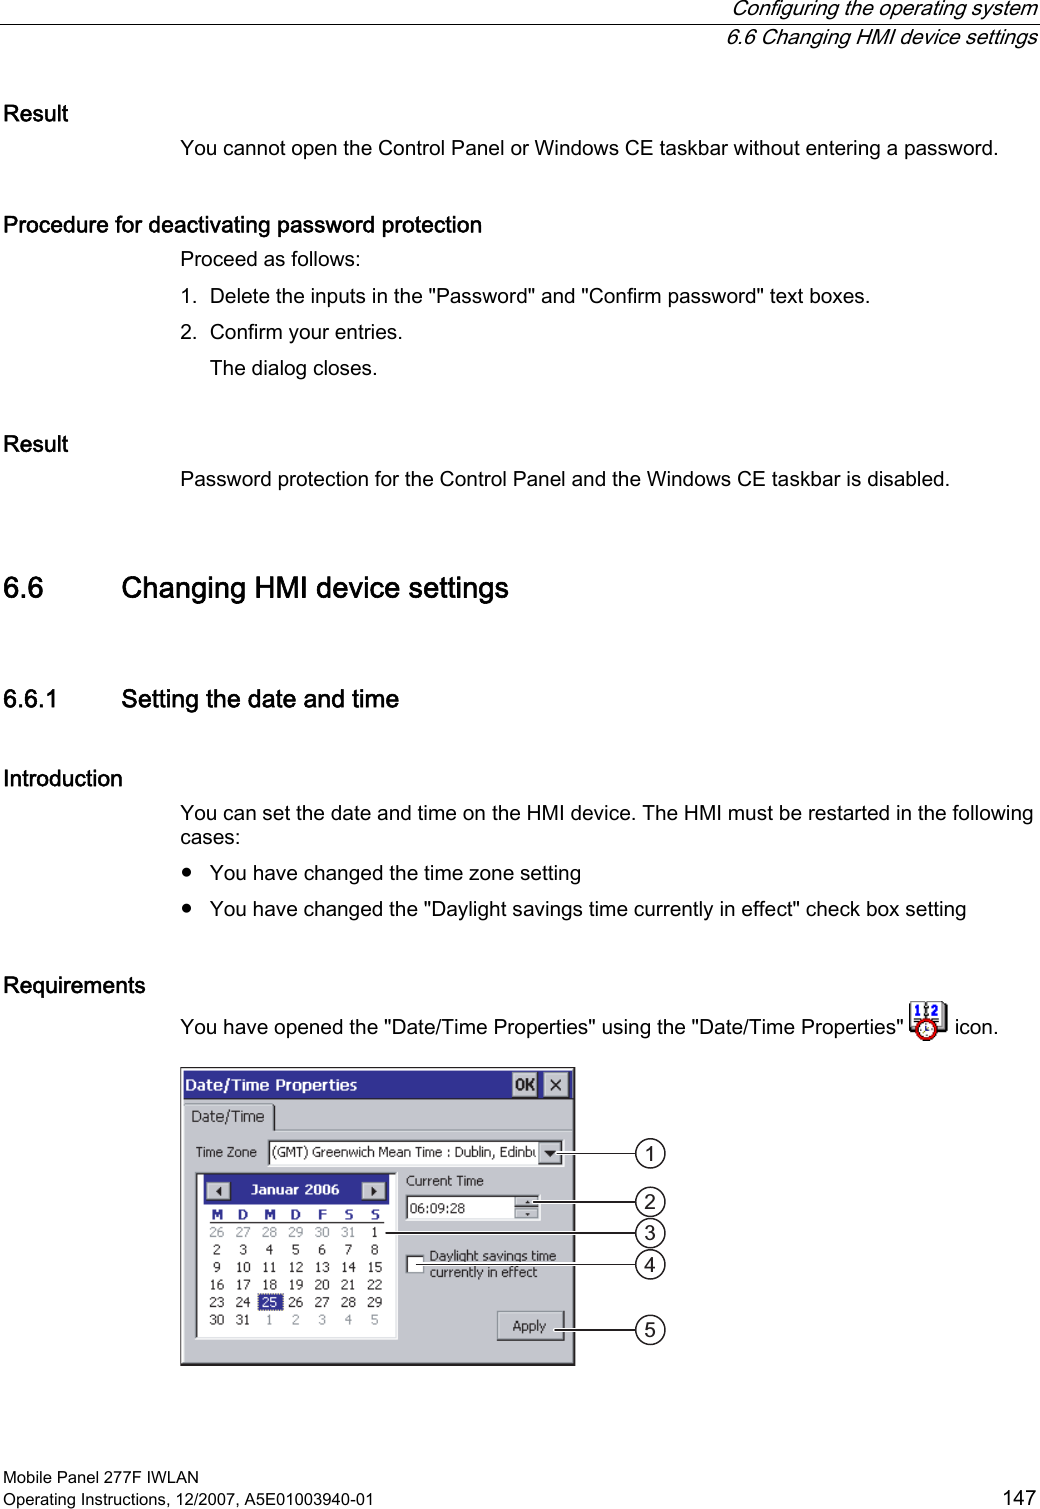  Configuring the operating system   6.6 Changing HMI device settings Mobile Panel 277F IWLAN Operating Instructions, 12/2007, A5E01003940-01  147 Result You cannot open the Control Panel or Windows CE taskbar without entering a password.  Procedure for deactivating password protection Proceed as follows:  1. Delete the inputs in the &quot;Password&quot; and &quot;Confirm password&quot; text boxes. 2. Confirm your entries. The dialog closes. Result Password protection for the Control Panel and the Windows CE taskbar is disabled.  6.6 Changing HMI device settings 6.6.1 Setting the date and time Introduction You can set the date and time on the HMI device. The HMI must be restarted in the following cases: ●  You have changed the time zone setting ●  You have changed the &quot;Daylight savings time currently in effect&quot; check box setting Requirements You have opened the &quot;Date/Time Properties&quot; using the &quot;Date/Time Properties&quot;   icon.    